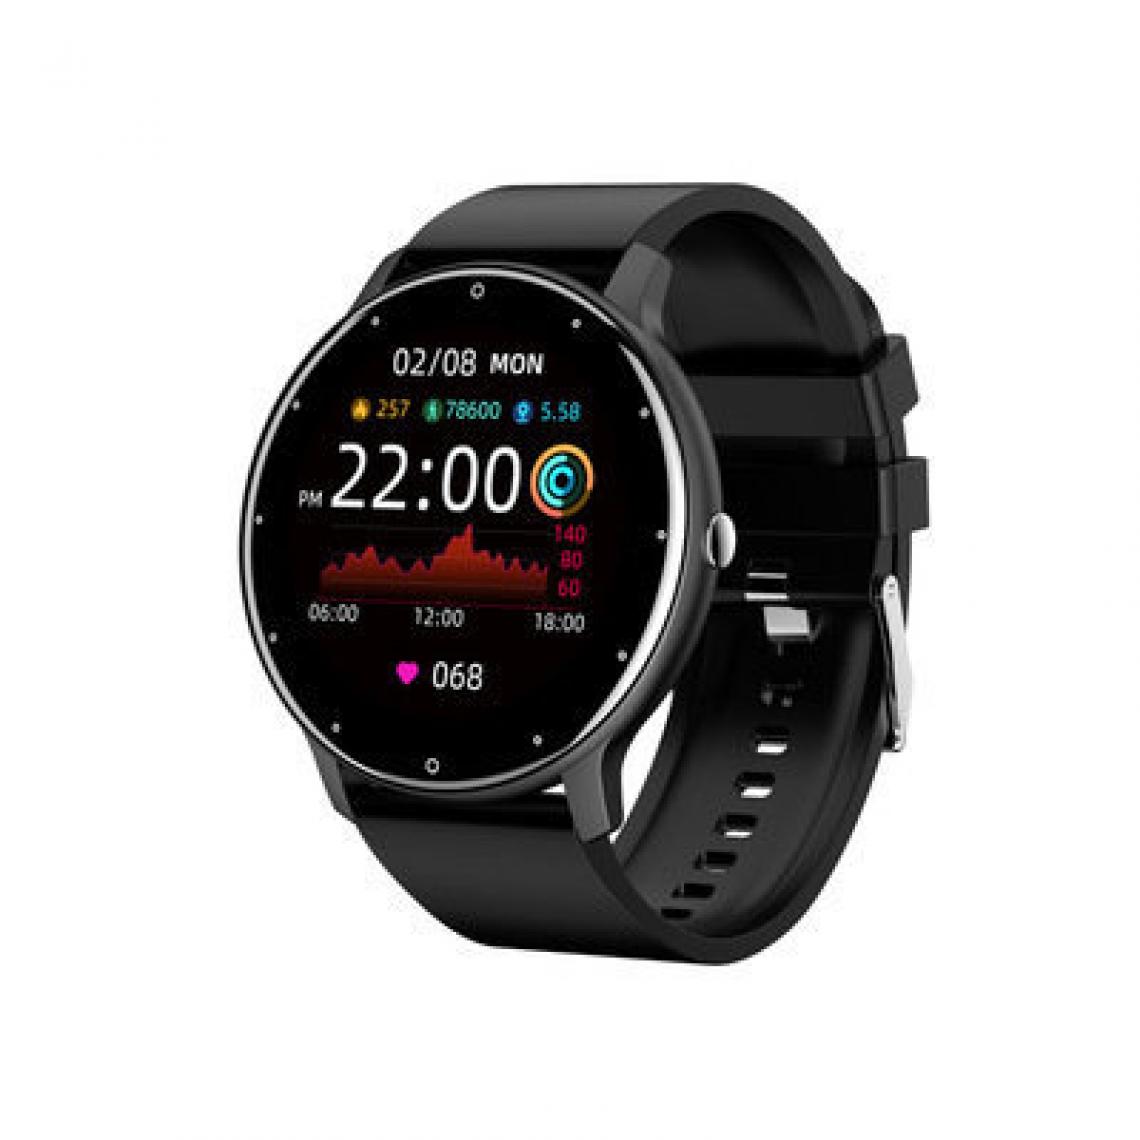 Chronotech Montres - Chronus Smart Watch Women Men Exercise Heart Rate Blood Pressure Fitness Tracker Waterproof Smartwatch for Ios Android(black) - Montre connectée